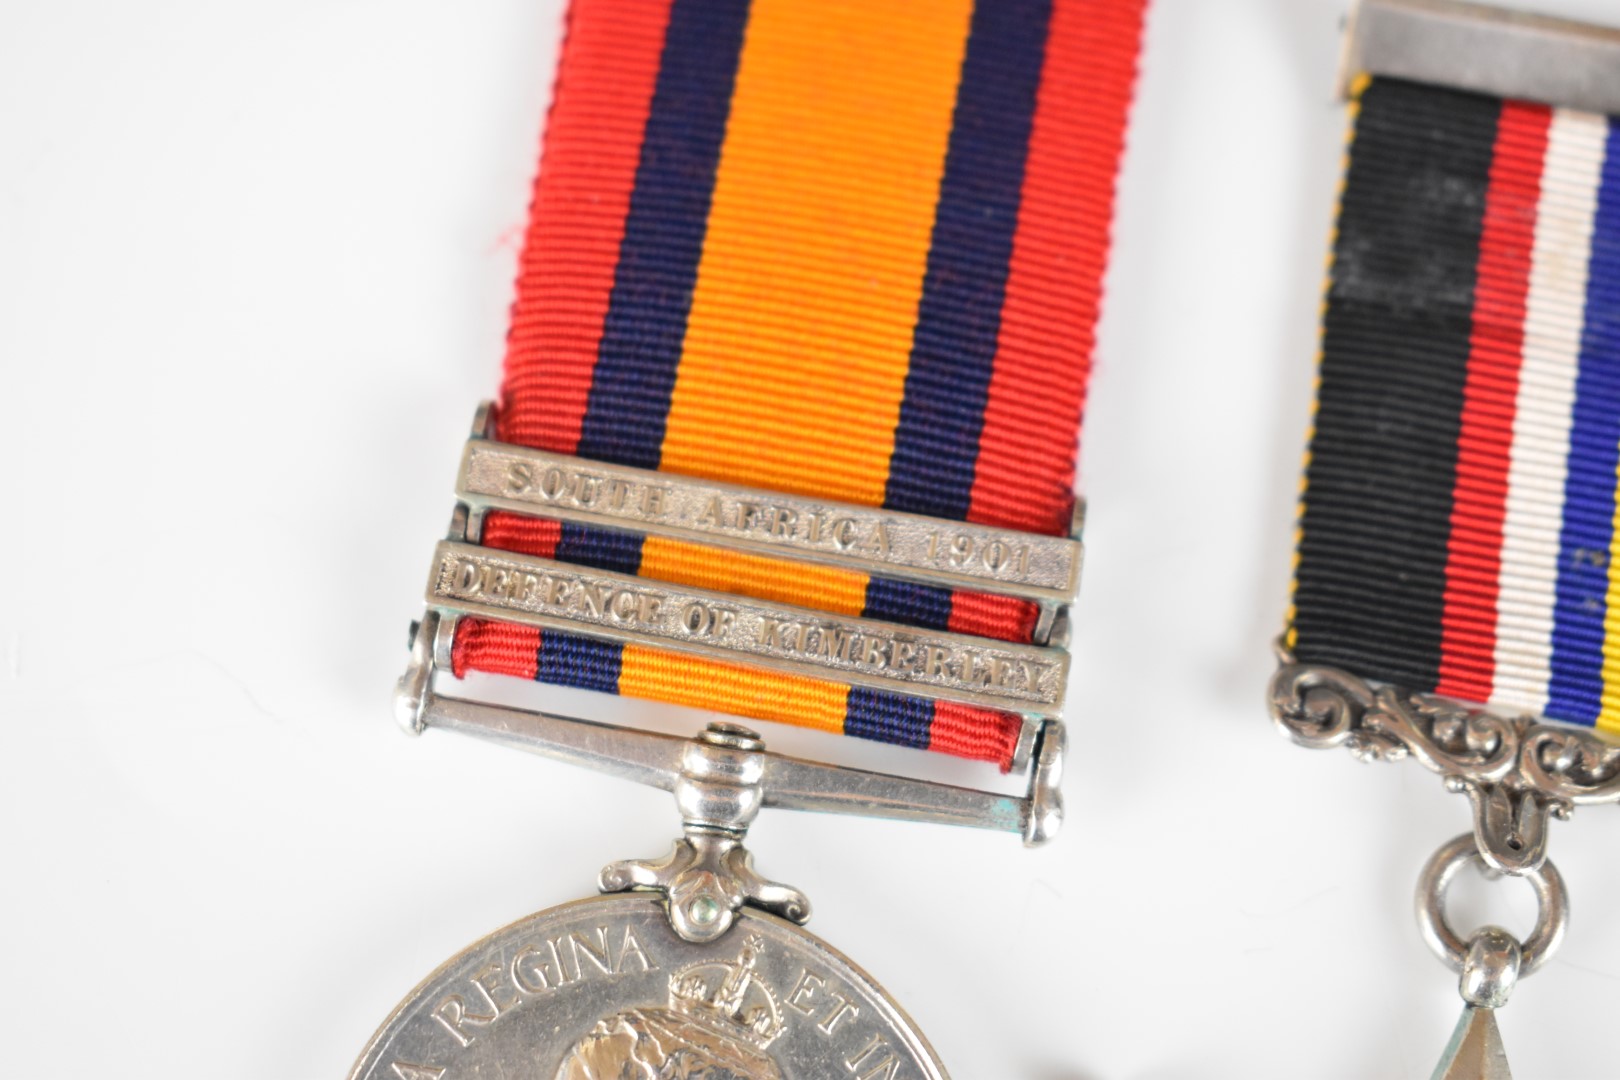 Queen's South Africa Medal with clasps for Defence of Kimberley and South Africa 1901 named to 828 - Image 14 of 22